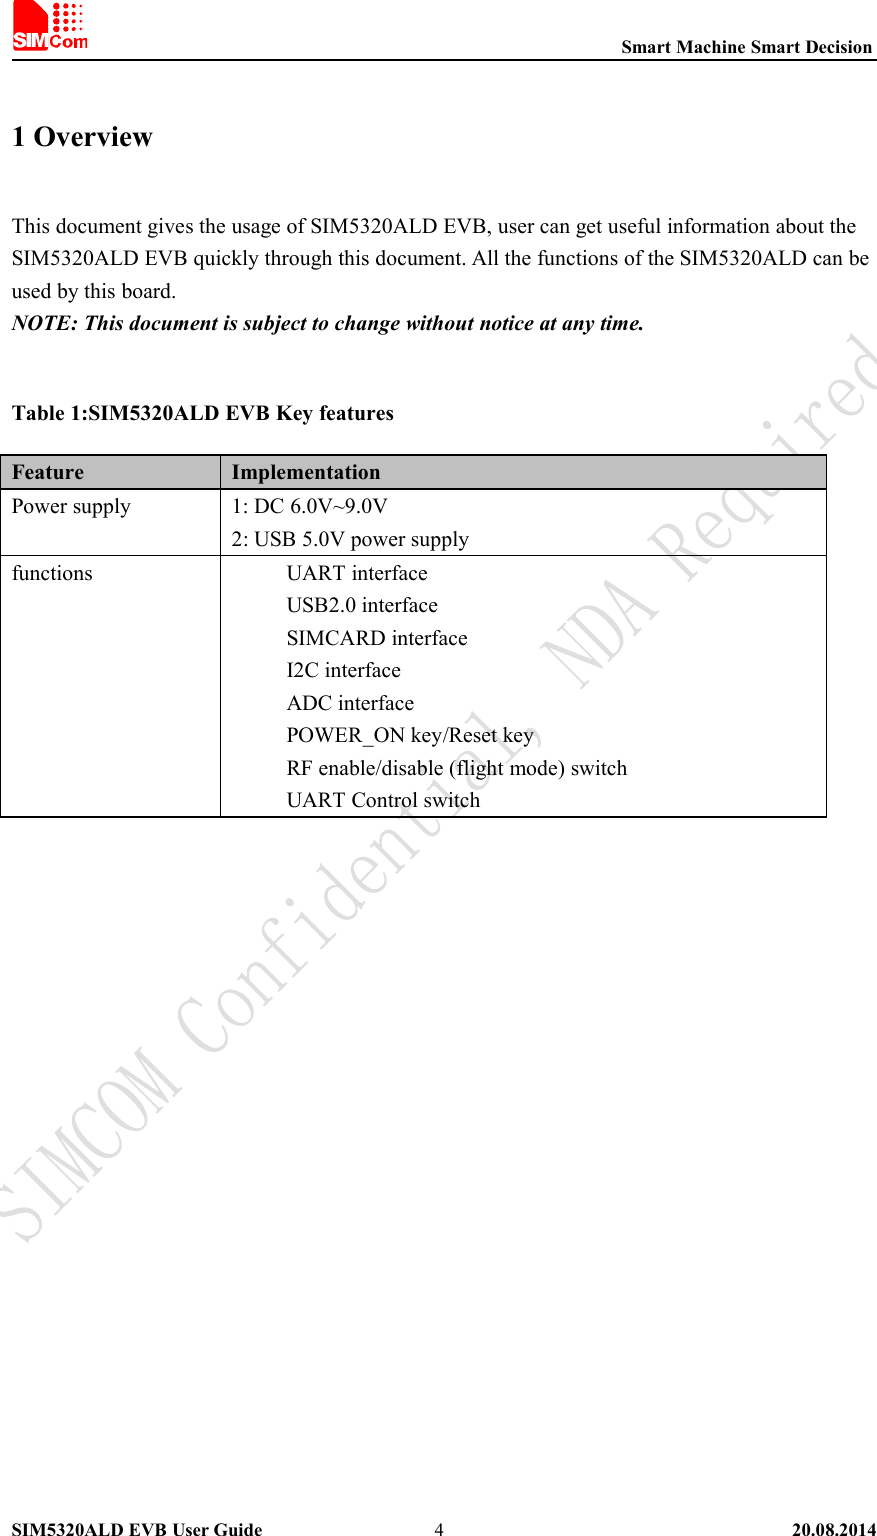 Smart Machine Smart DecisionSIM5320ALD EVB User Guide 20.08.201441 OverviewThis document gives the usage of SIM5320ALD EVB, user can get useful information about theSIM5320ALD EVB quickly through this document. All the functions of the SIM5320ALD can beused by this board.NOTE: This document is subject to change without notice at any time.Table 1:SIM5320ALD EVB Key featuresFeature ImplementationPower supply 1: DC 6.0V~9.0V2: USB 5.0V power supplyfunctions UART interfaceUSB2.0 interfaceSIMCARD interfaceI2C interfaceADC interfacePOWER_ON key/Reset keyRF enable/disable (flight mode) switchUART Control switch